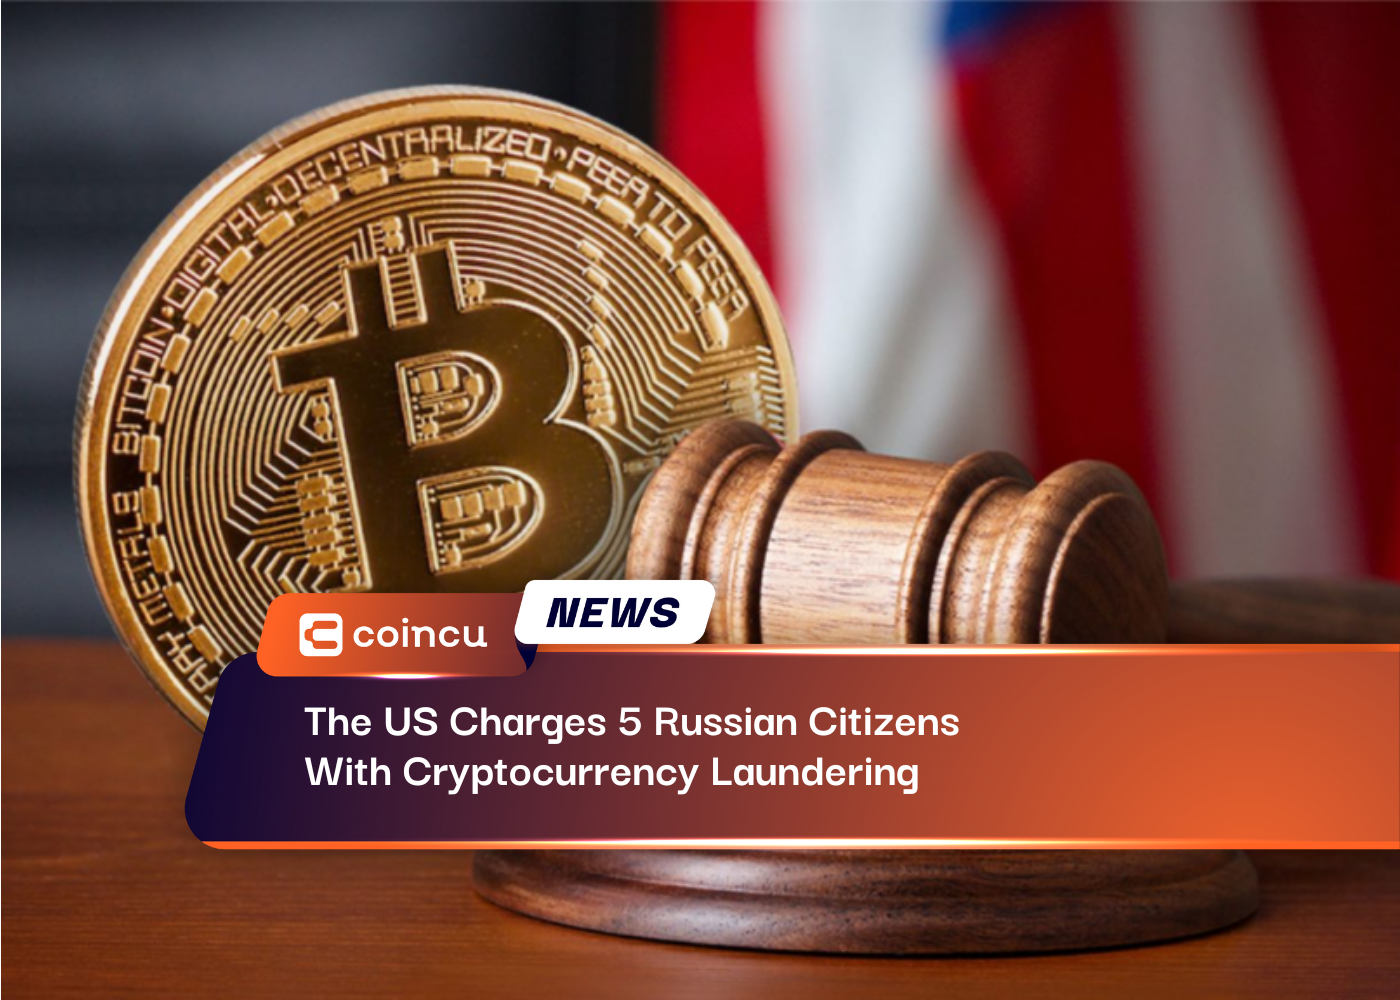 The US Charges 5 Russian Citizens With Cryptocurrency Laundering